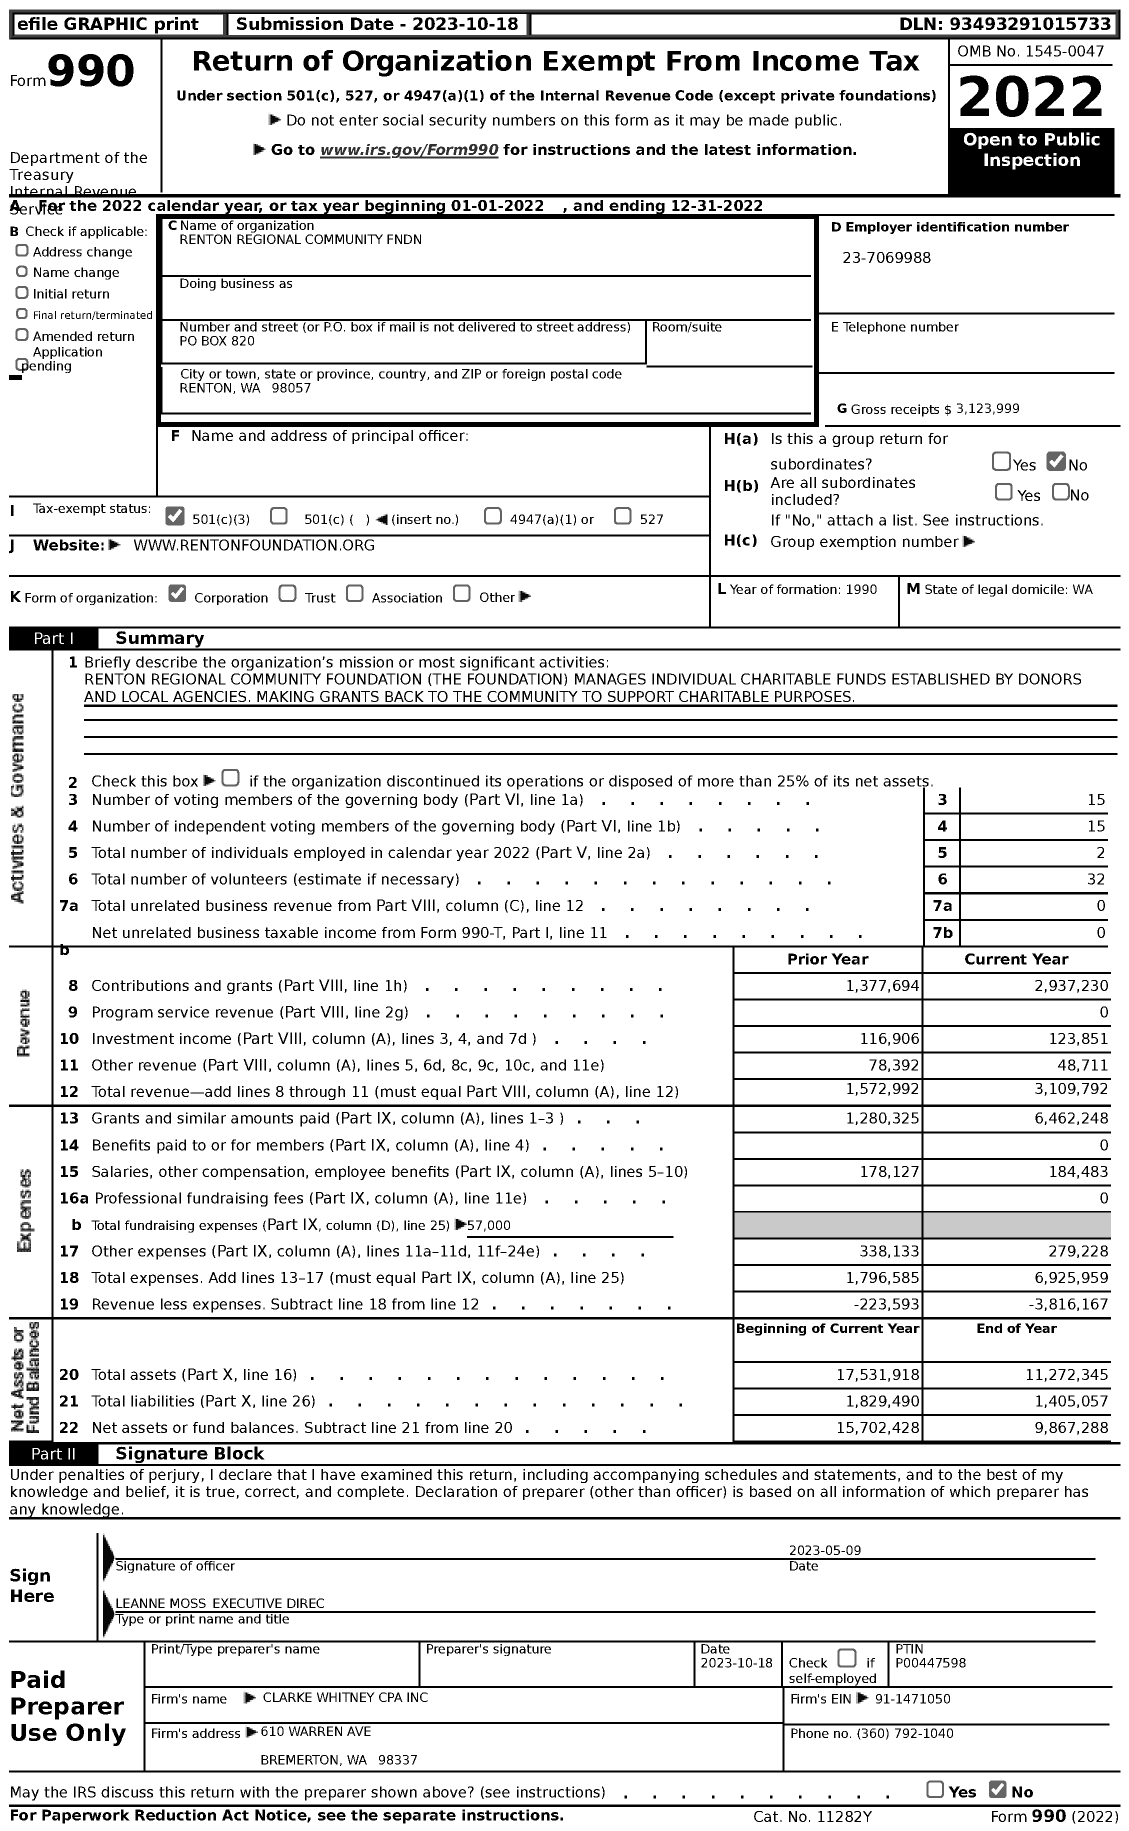 Image of first page of 2022 Form 990 for Renton Regional Community FNDN